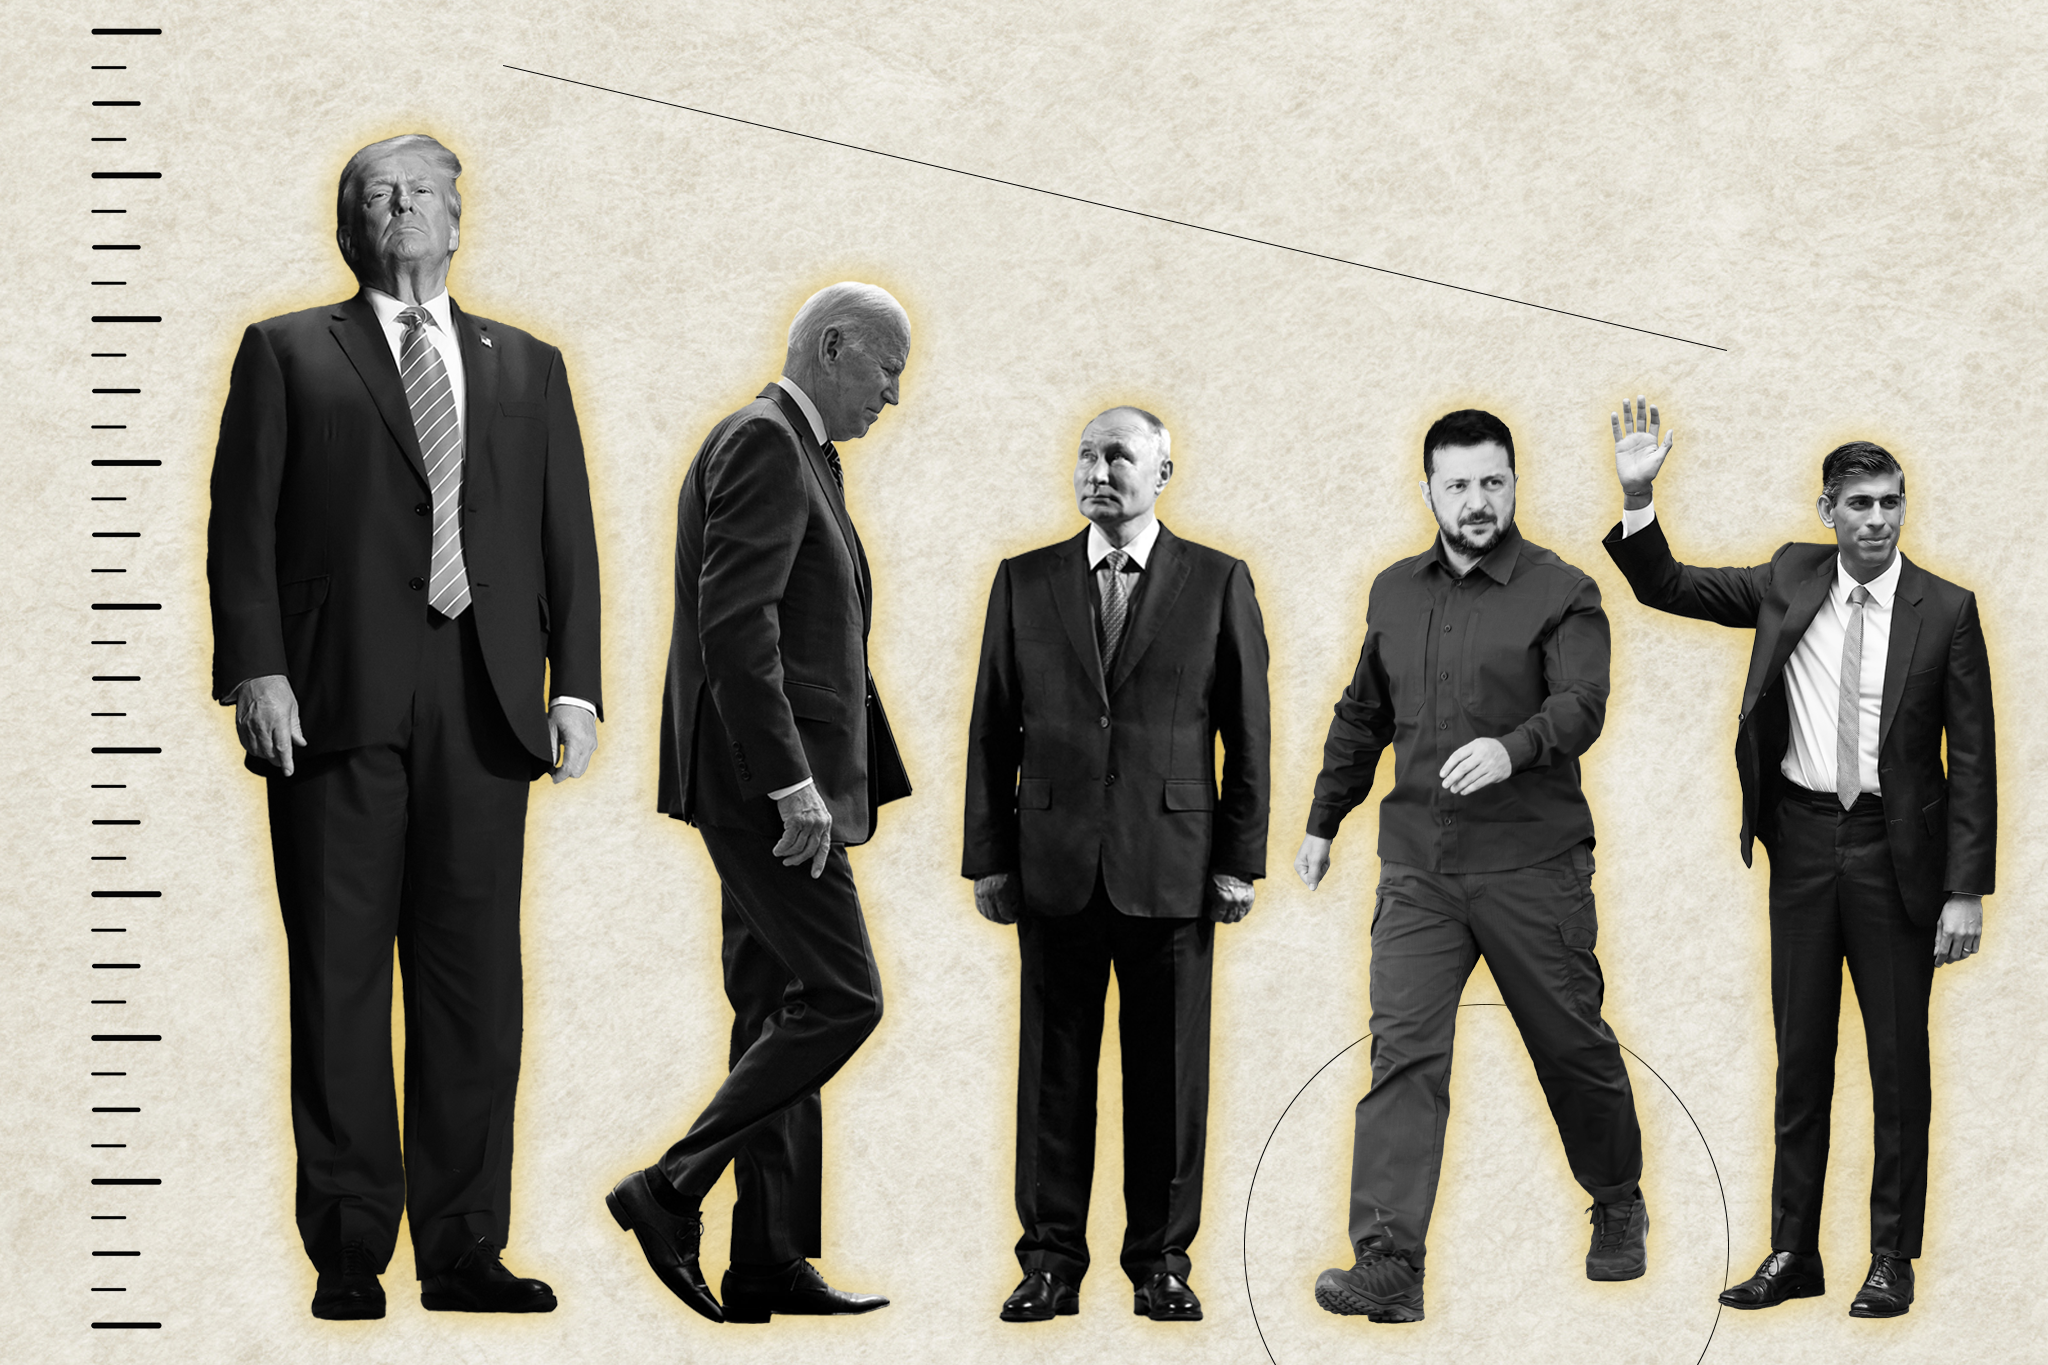 Honey I shrunk the world’s politicians – how leaders are getting smaller and smaller